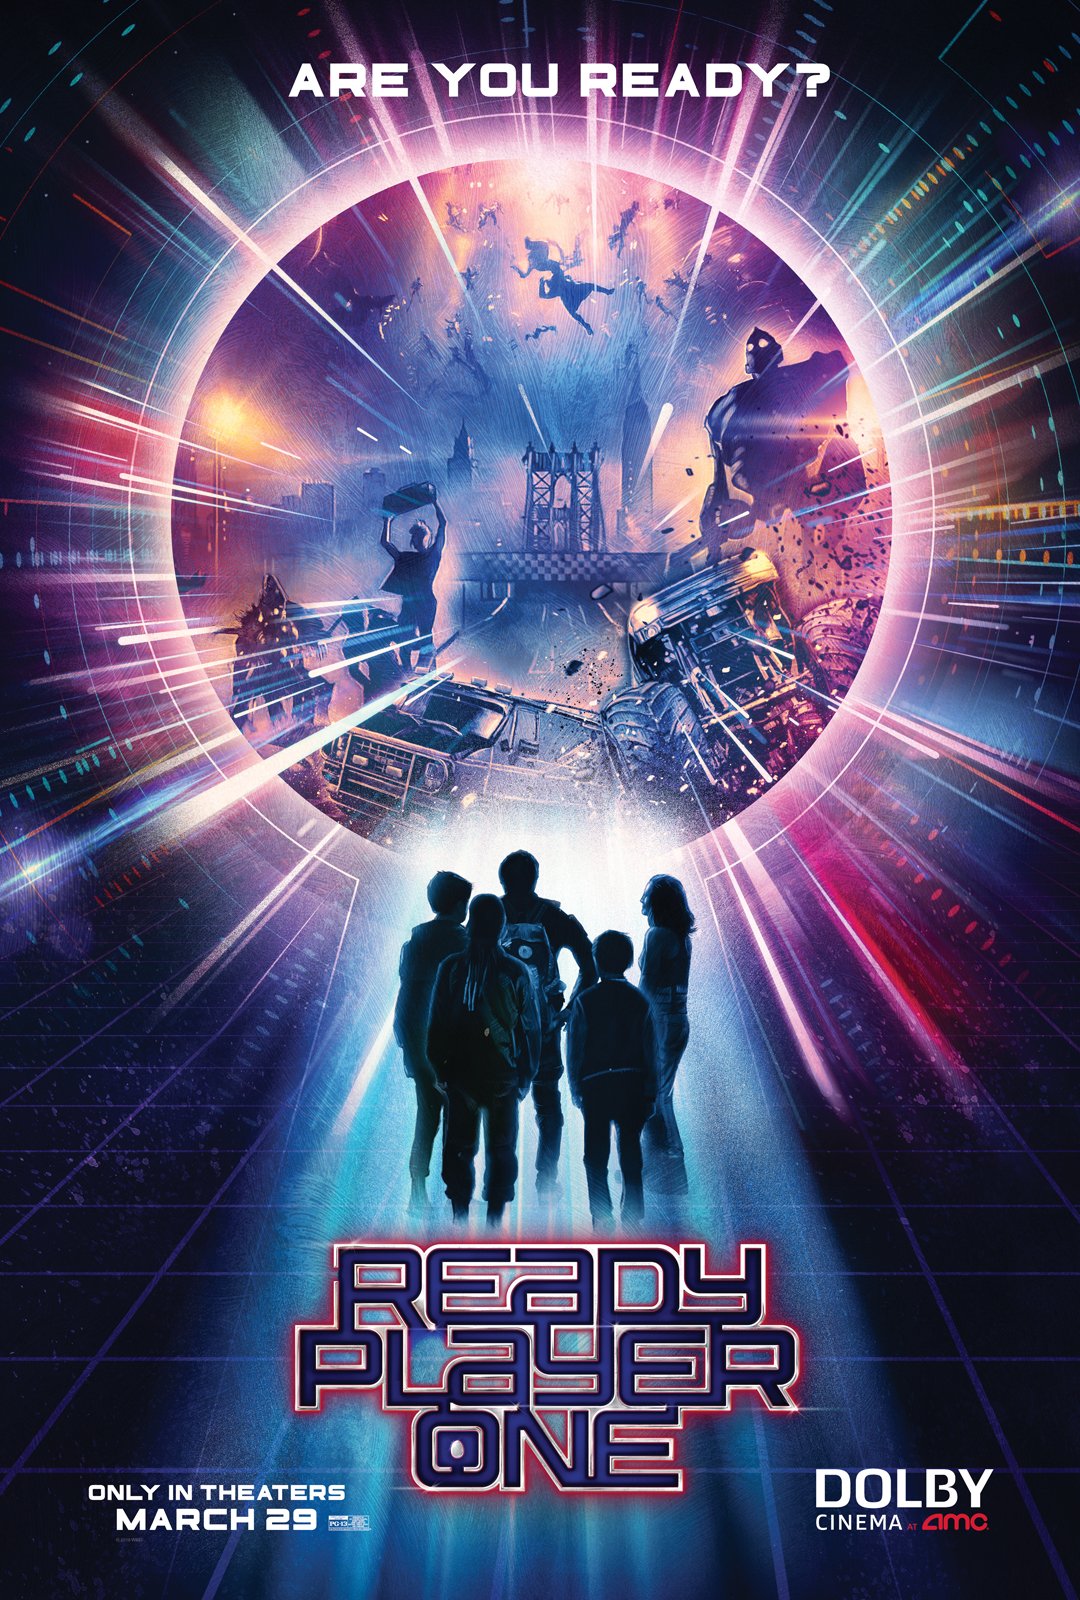 AMC Theatres - Check out Dolby Cinema's exclusive poster for The